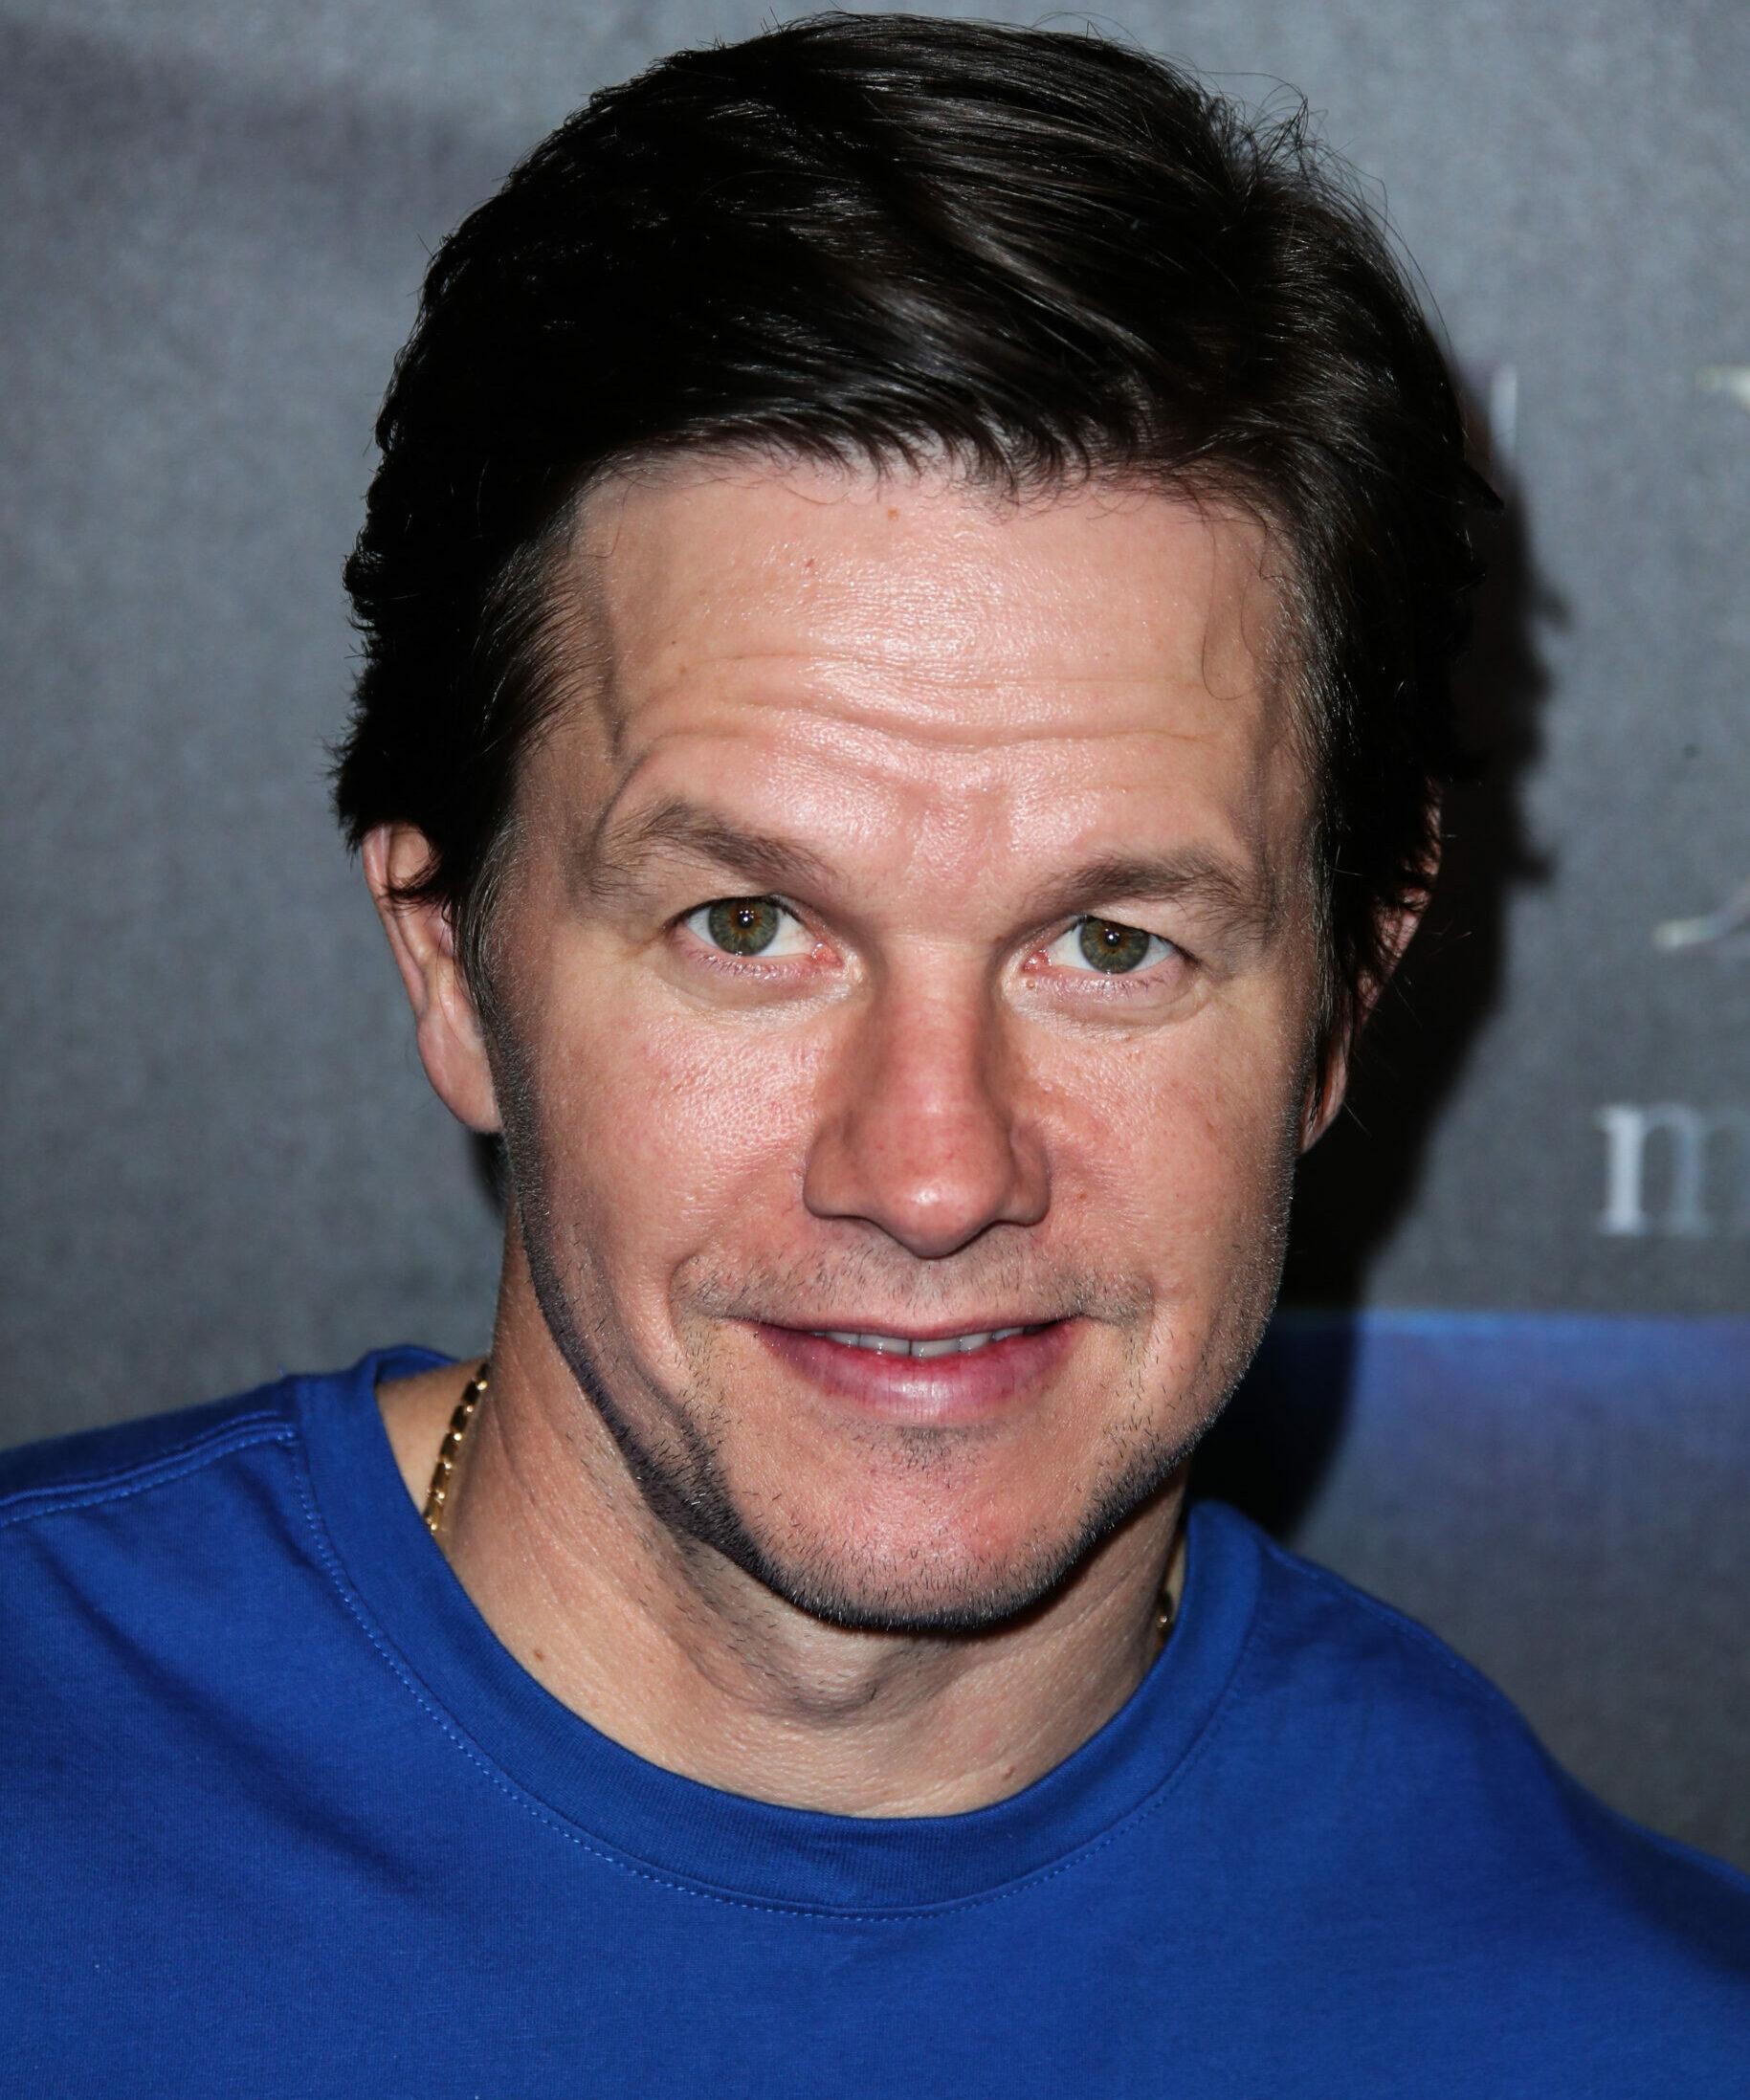 Mark Wahlberg at CinemaCon 2018 - STX Entertainment The State Of The Industry: Past, Present And Future Presentation